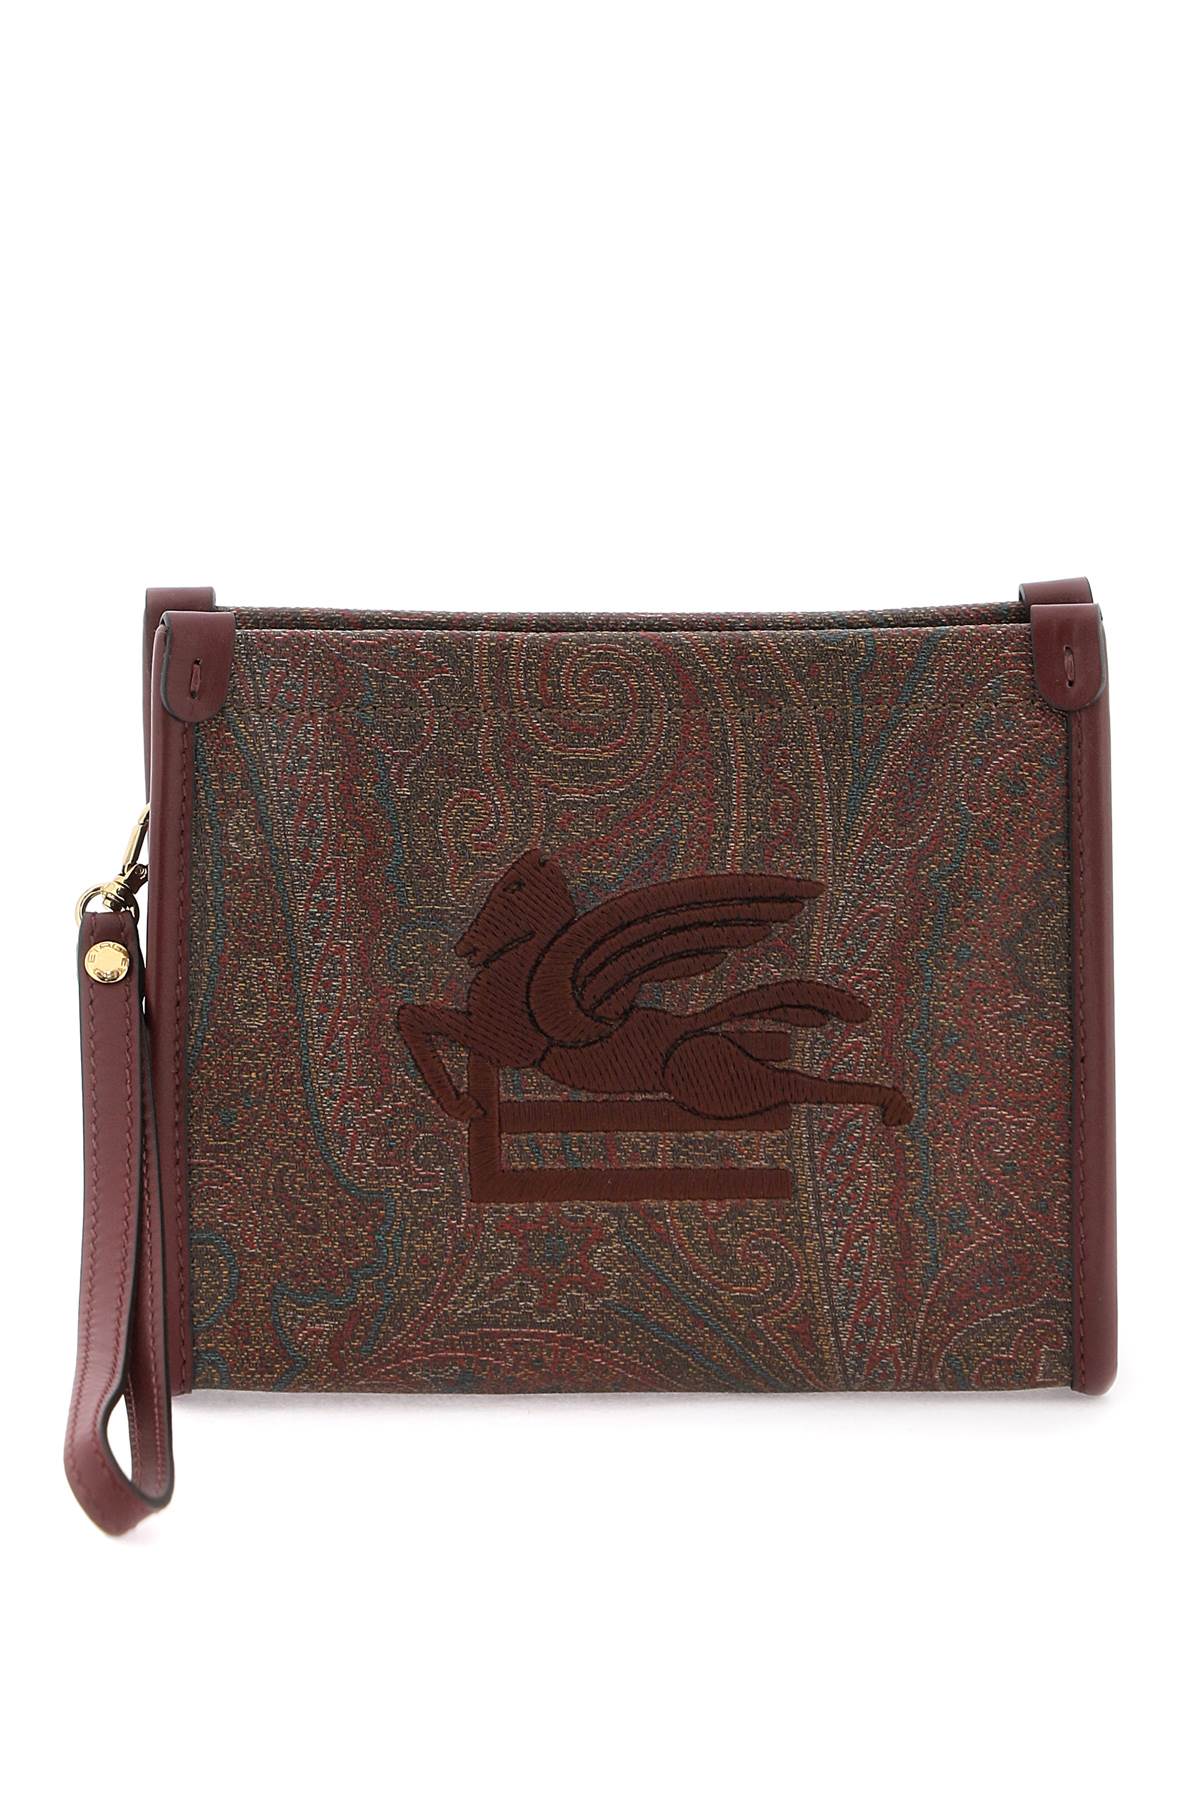 Etro Logo Paisley All-over Print Clutch